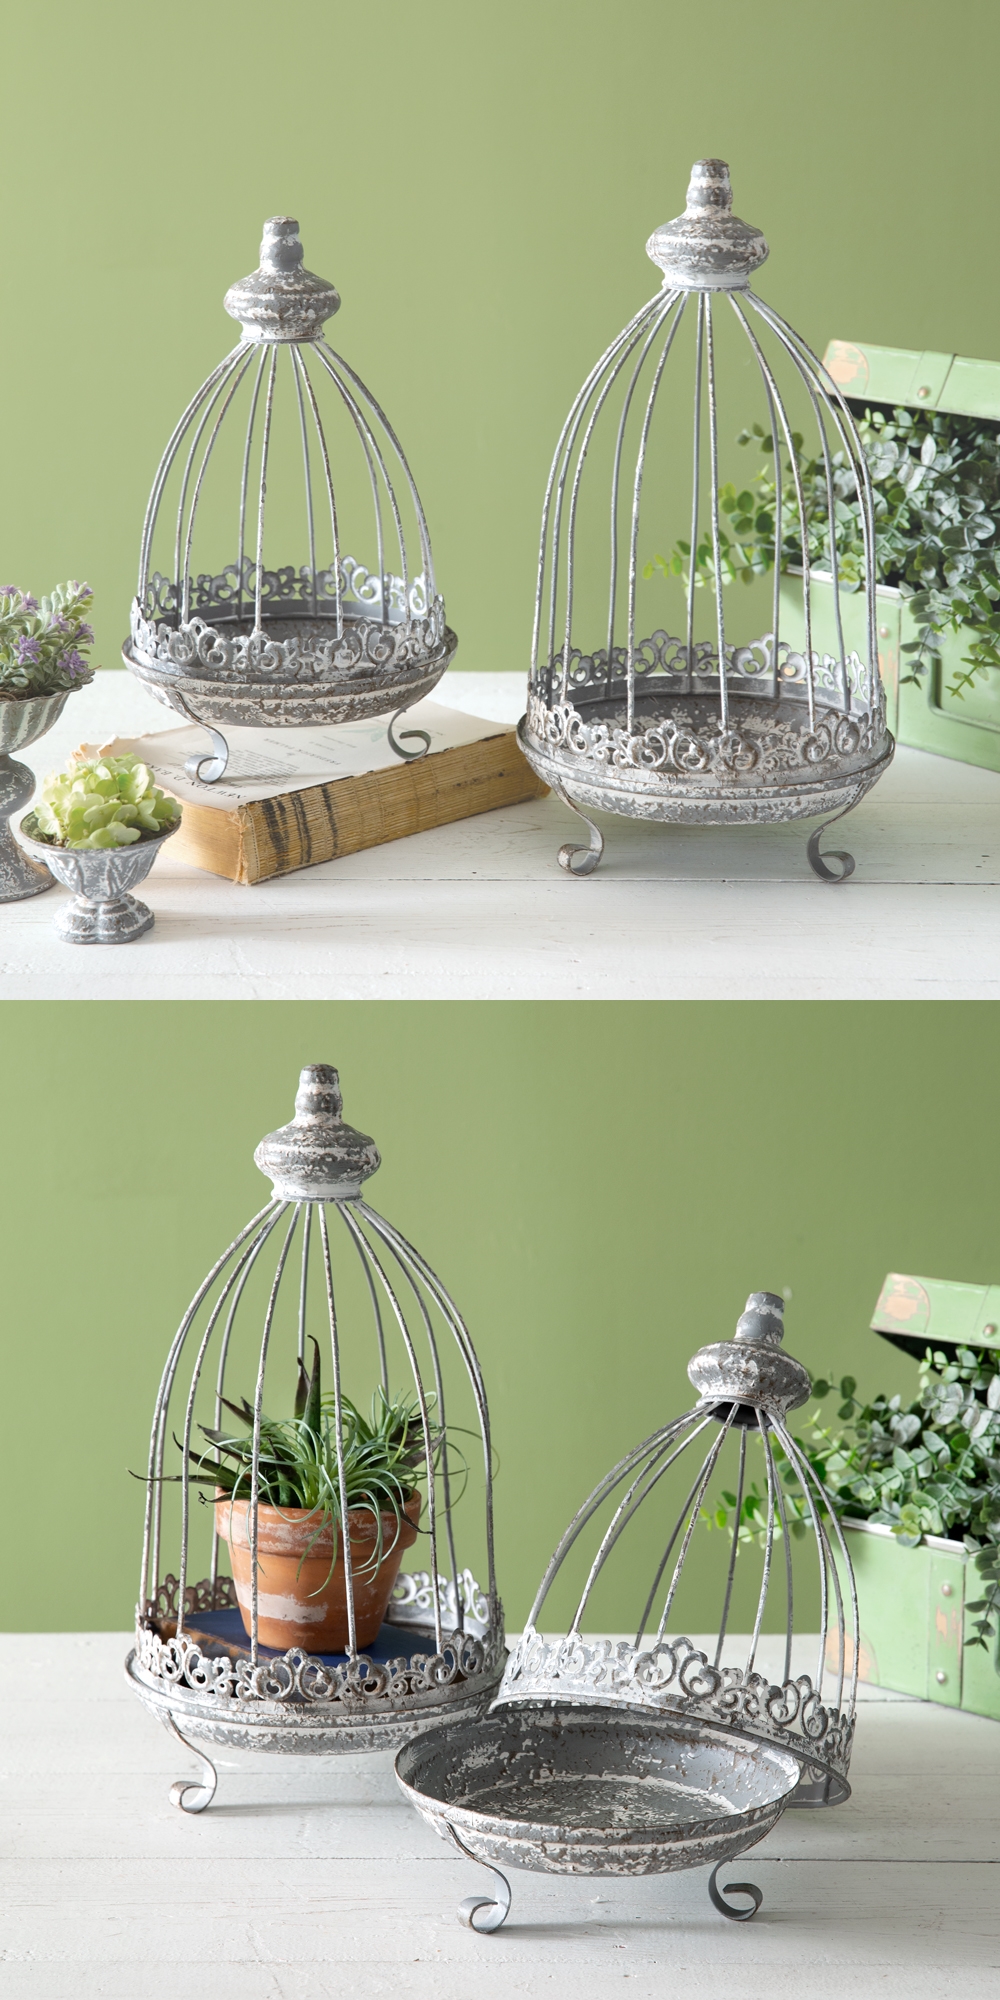 CTW Home Collection Set of Two 'Stone Valley' Footed Metal Cloches